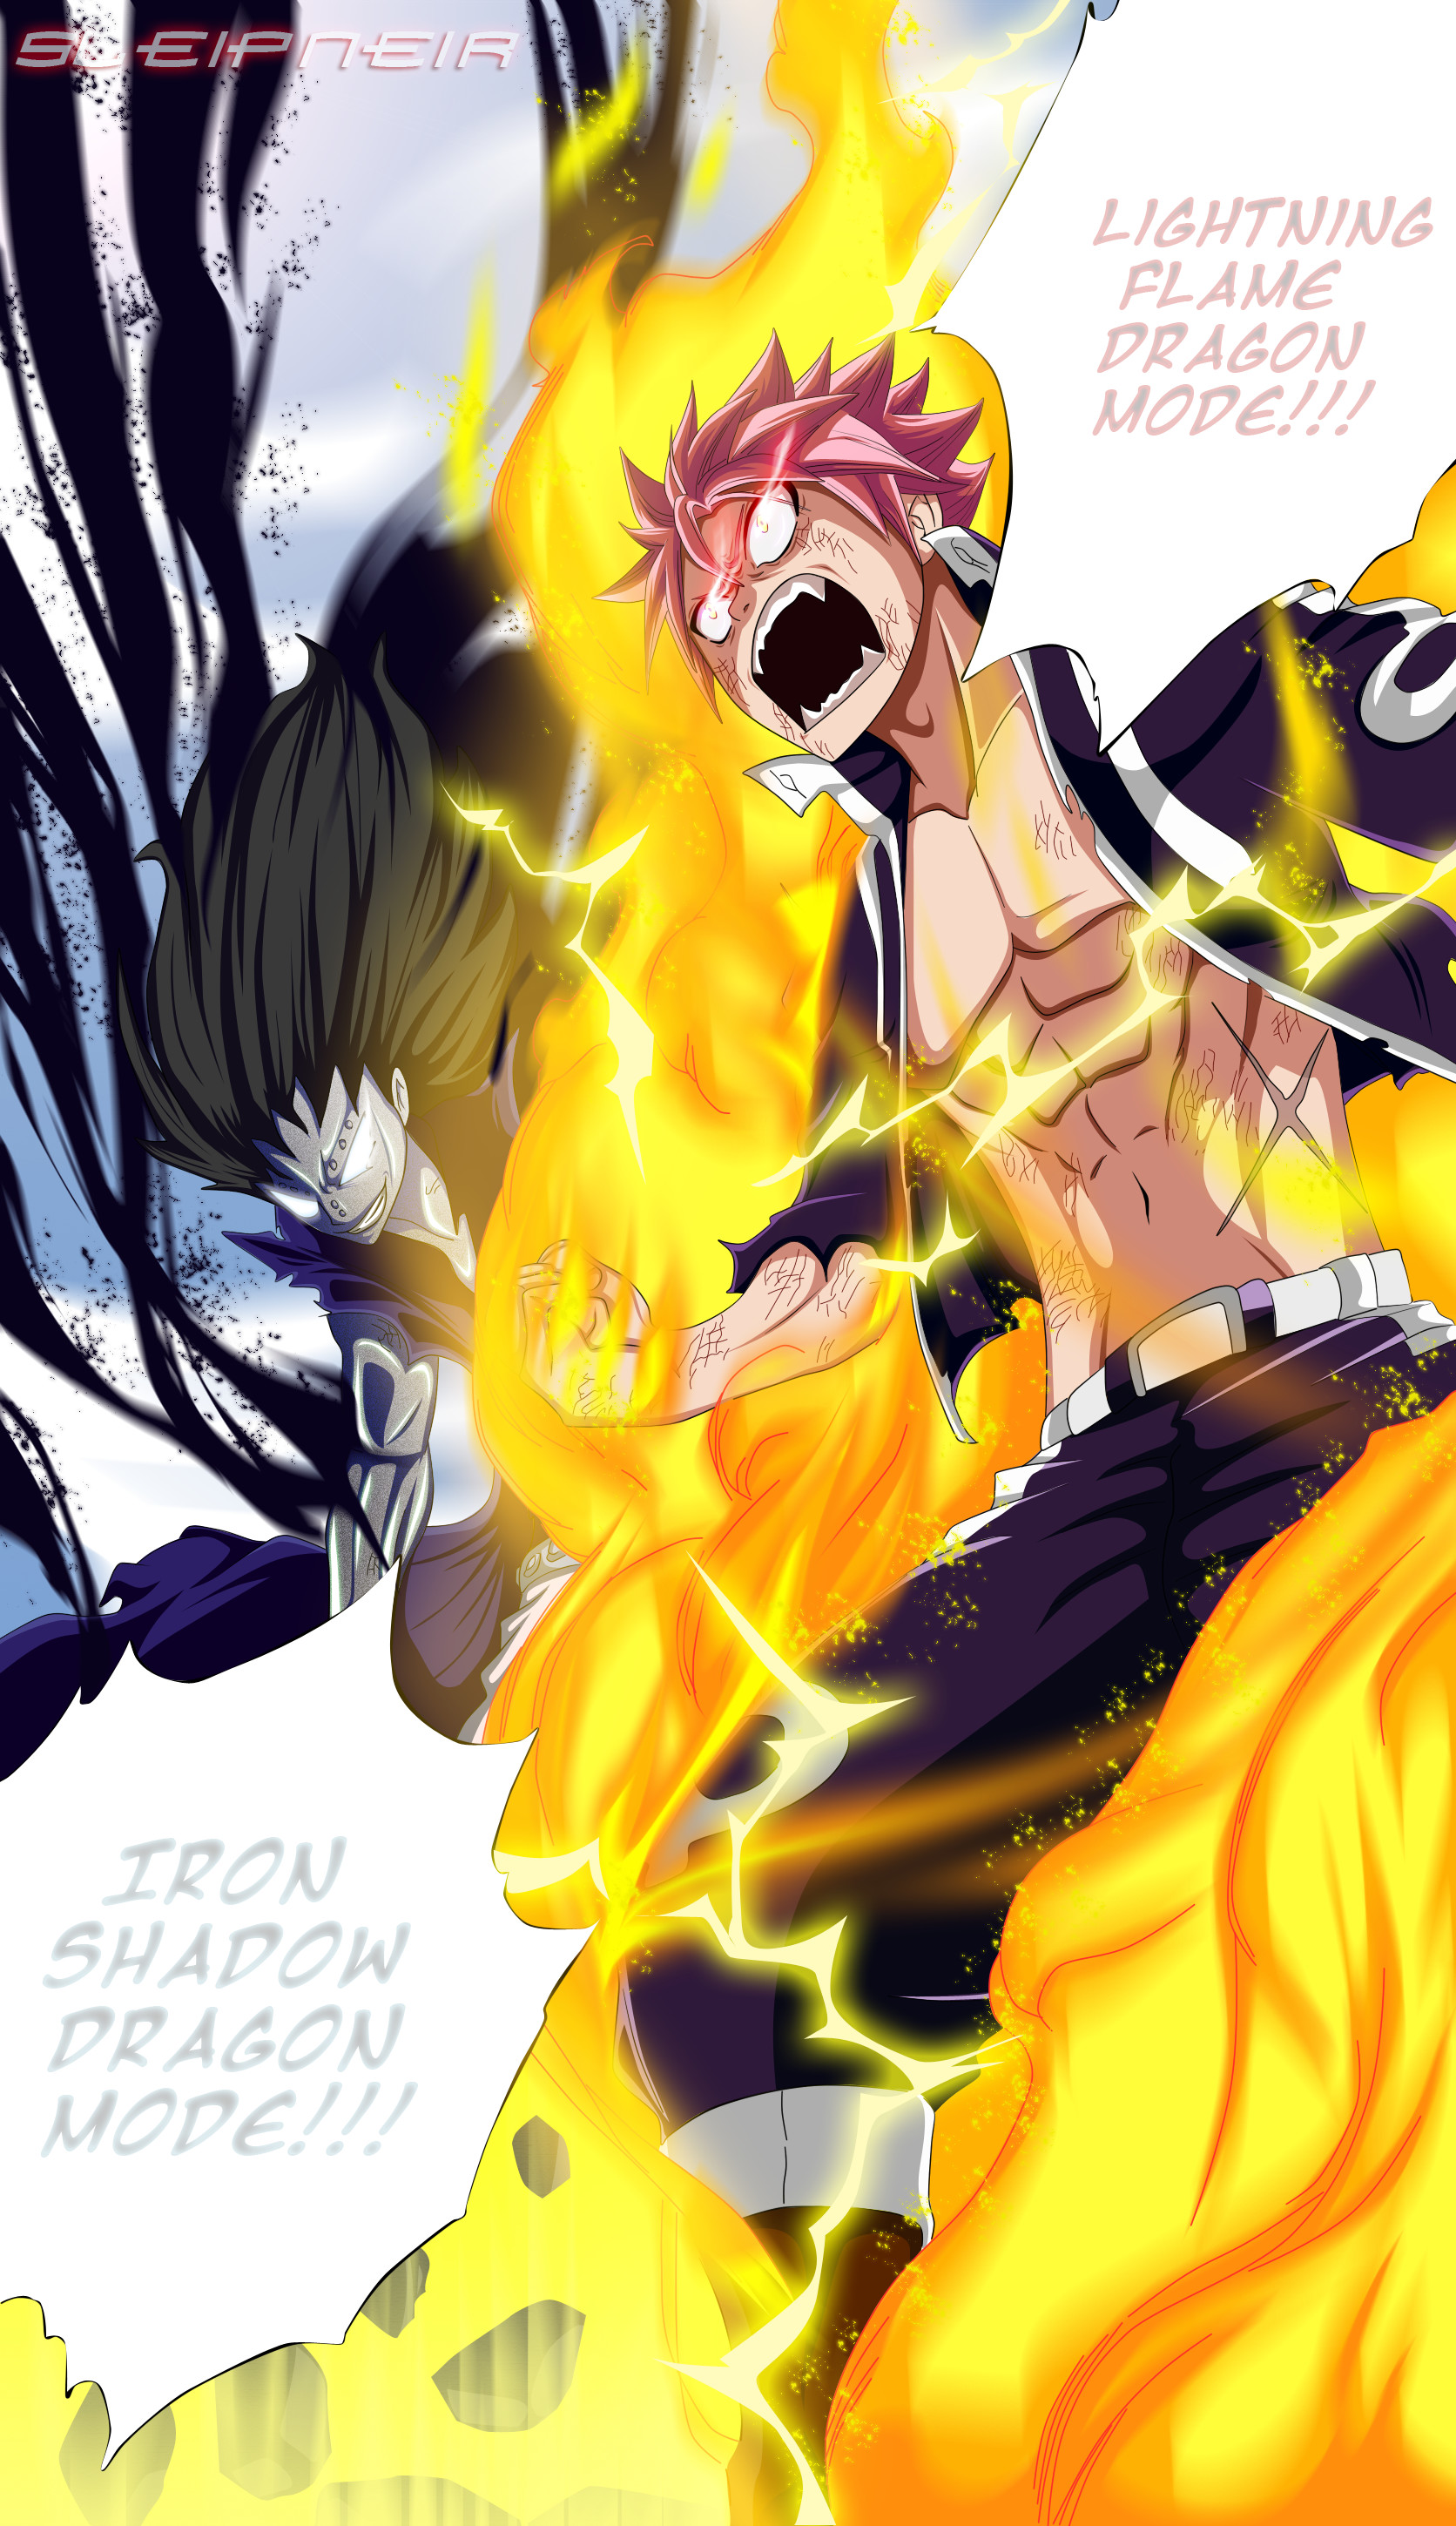 … Lightning Flame and Iron Shadow Dragon mode by sleipneir